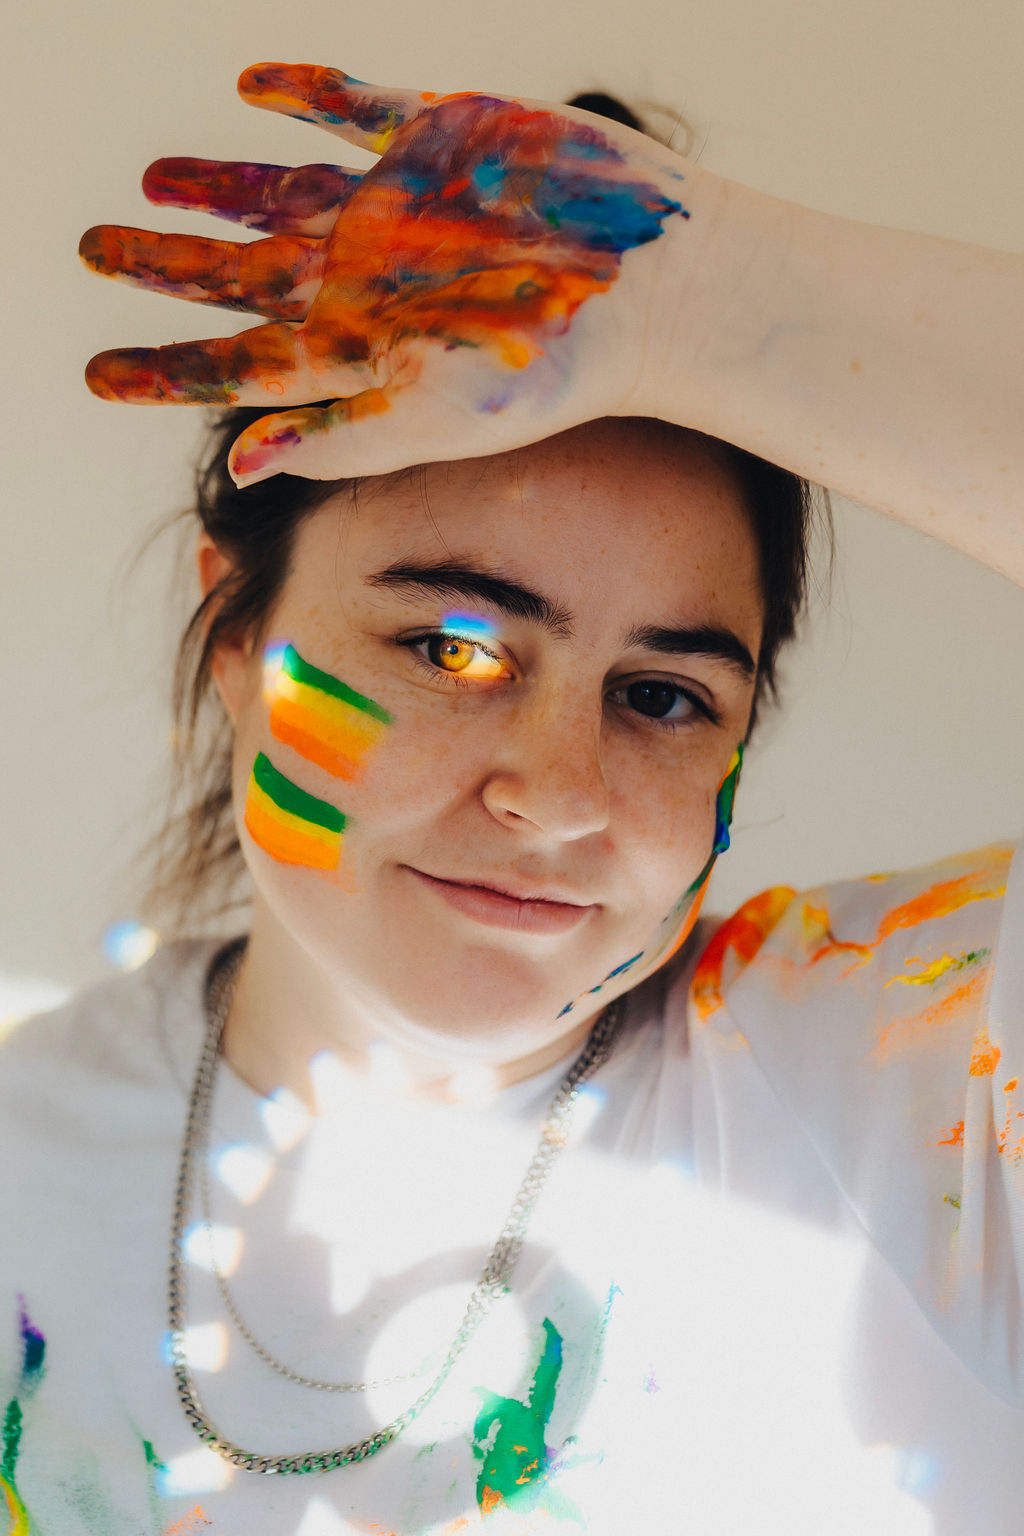 A girl with paint on her face and hands poses while thinking about inspiring photography websites.